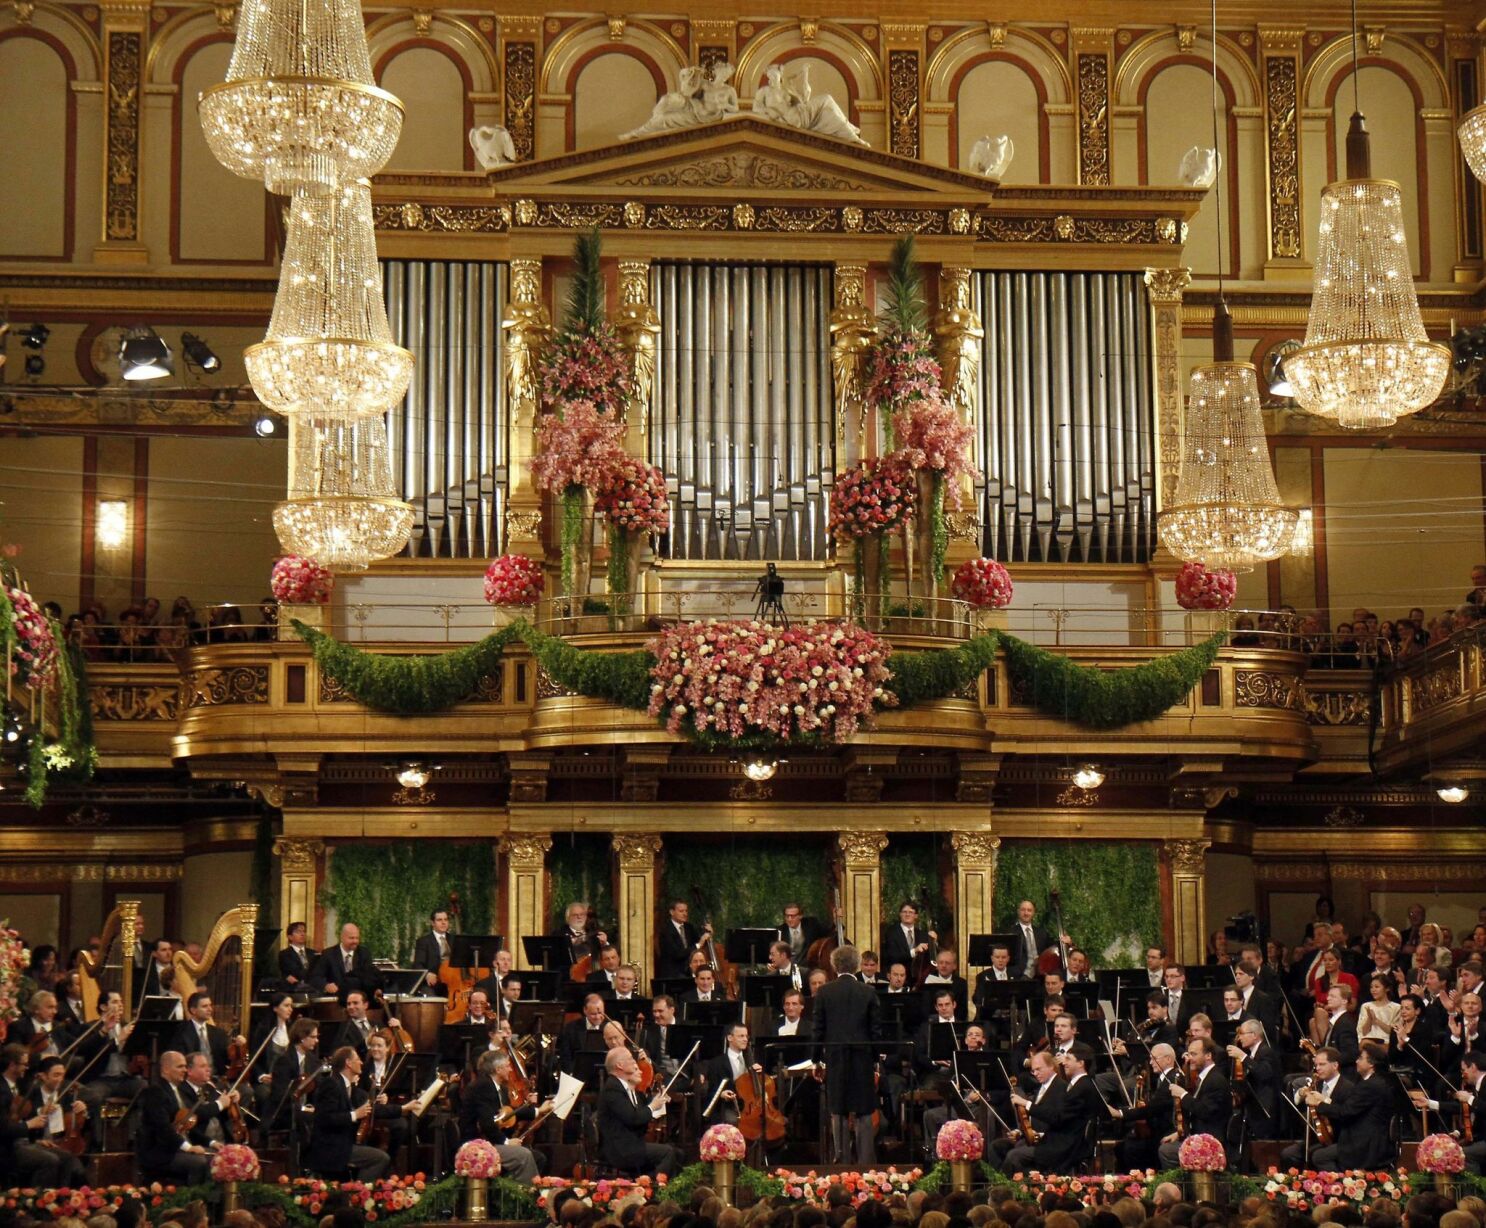 III. The Tradition of the Vienna Philharmonic's Sound